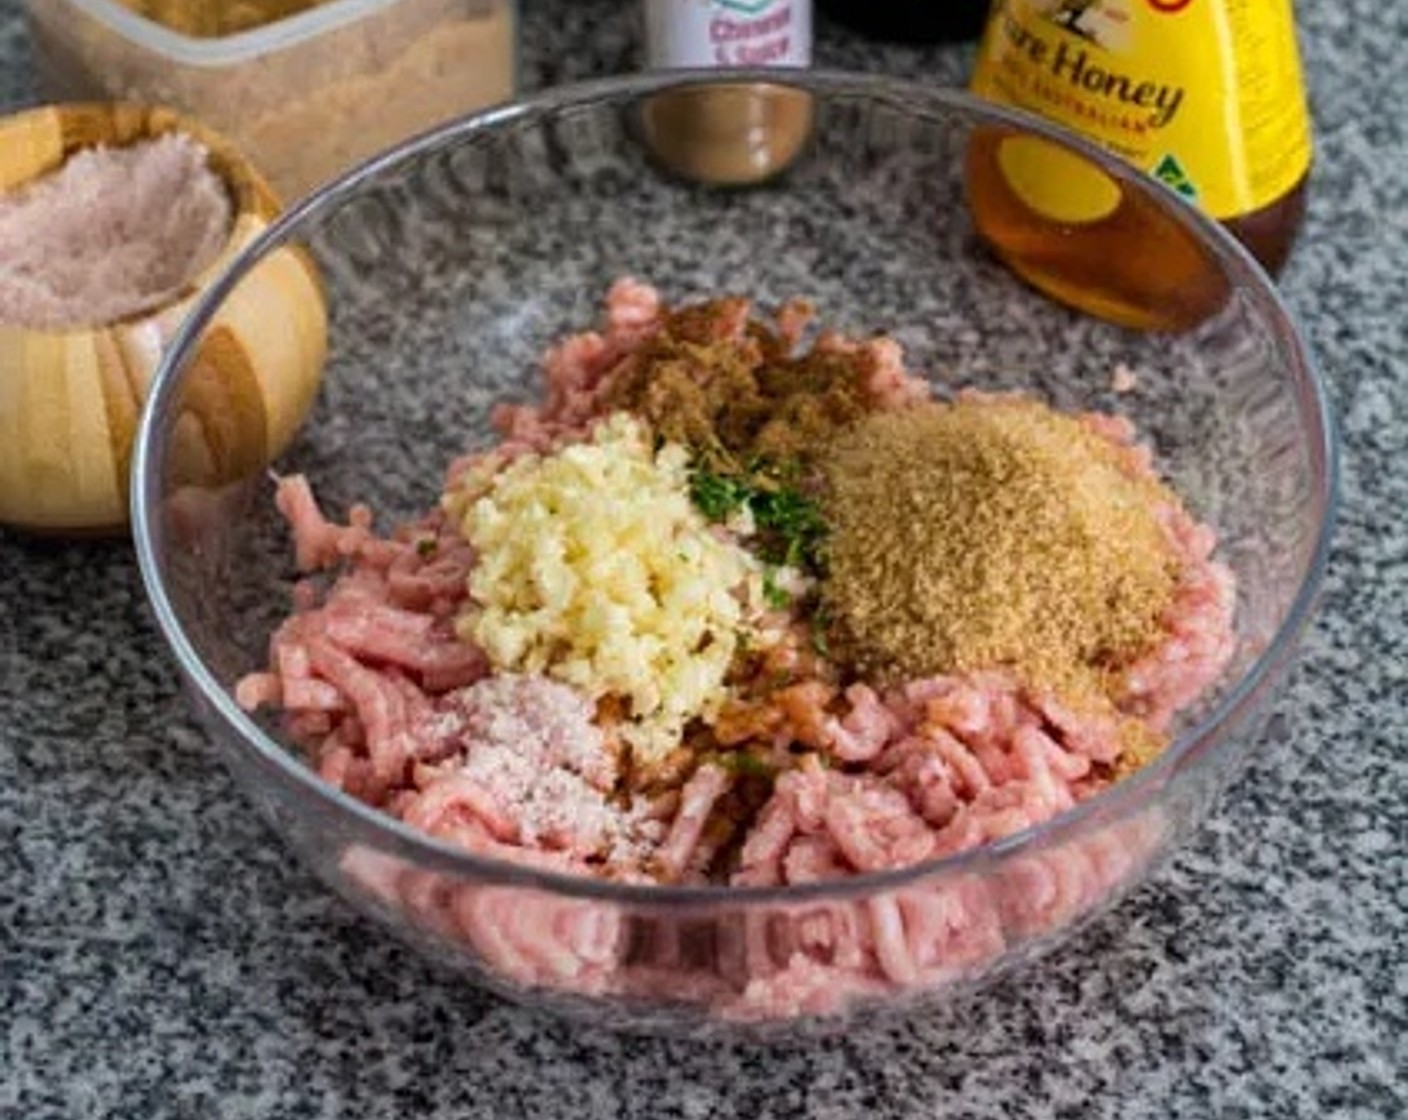 step 1 In a large bowl add Ground Pork (1 lb), Honey (1 Tbsp), Light Soy Sauce (1 1/2 Tbsp), Shaoxing Cooking Wine (1/2 Tbsp), Brown Sugar (2 Tbsp), Corn Starch (1 1/2 Tbsp), Chinese Five Spice Powder (1 tsp), Salt (1/2 tsp), Garlic (3 cloves), and Fresh Cilantro Leaves (5). Mix well and allow to marinate for 15 minutes.